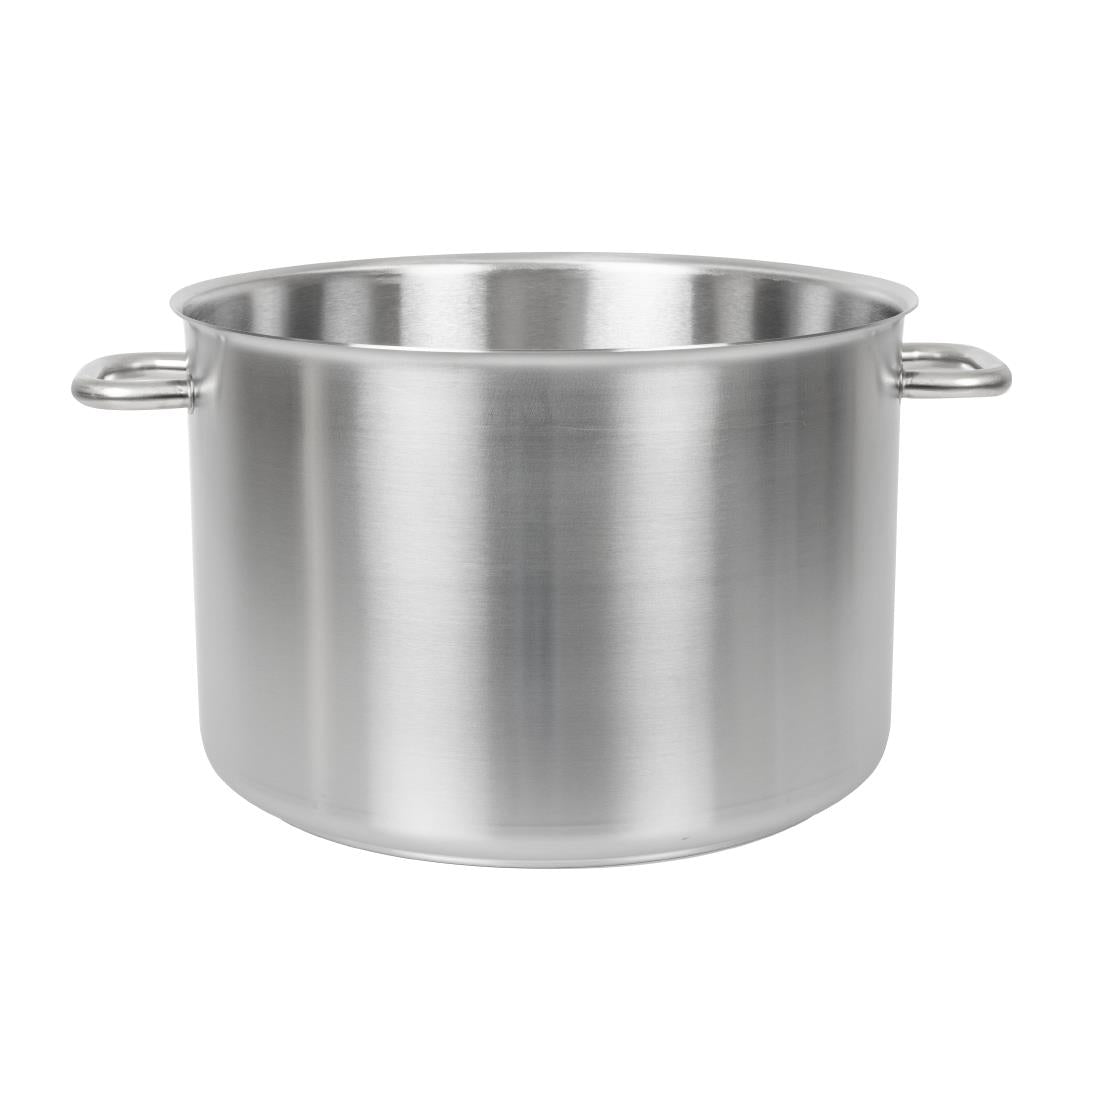 Bourgeat Excellence Stock Pot 50Ltr JD Catering Equipment Solutions Ltd